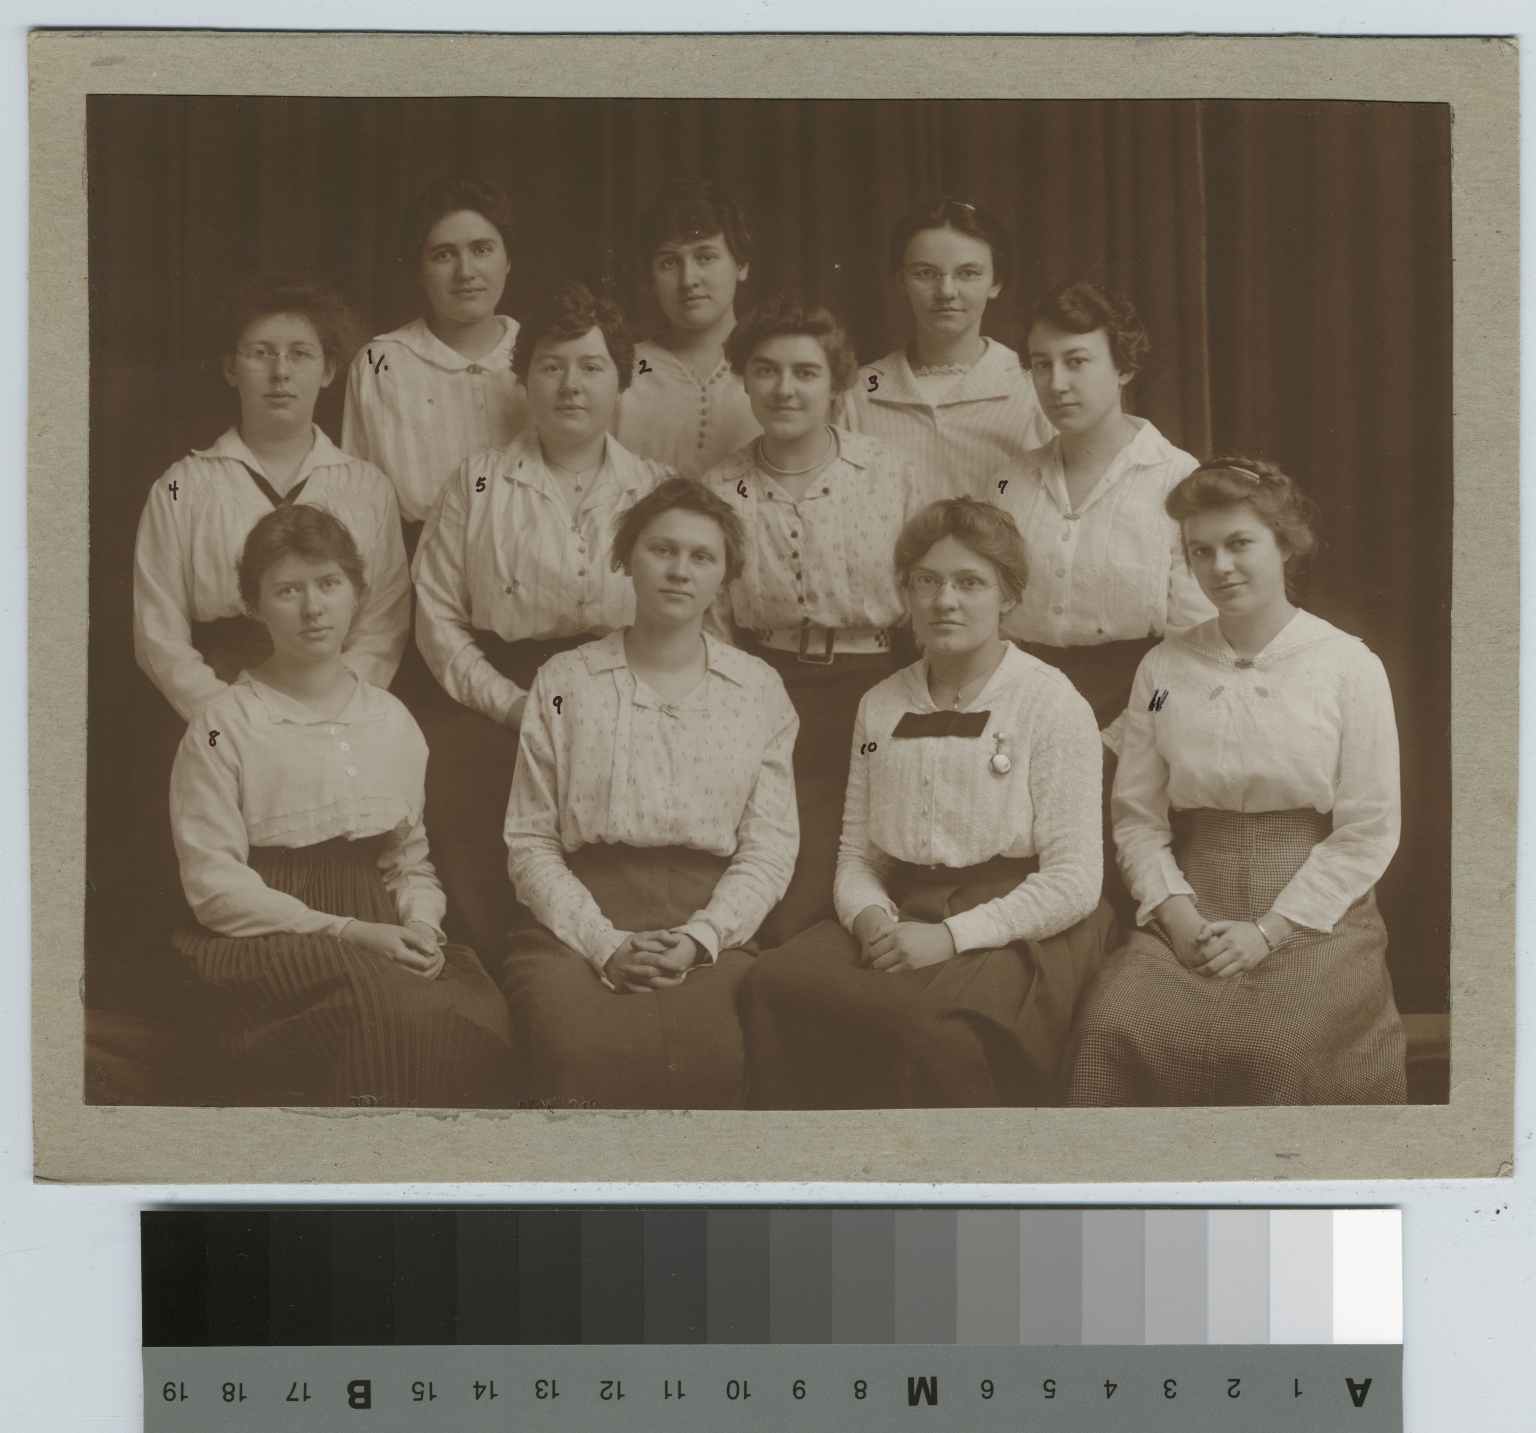 Academics, class photo, group portrait of female Rochester Athenaeum and Mechanics Institute students, [1900-1920]